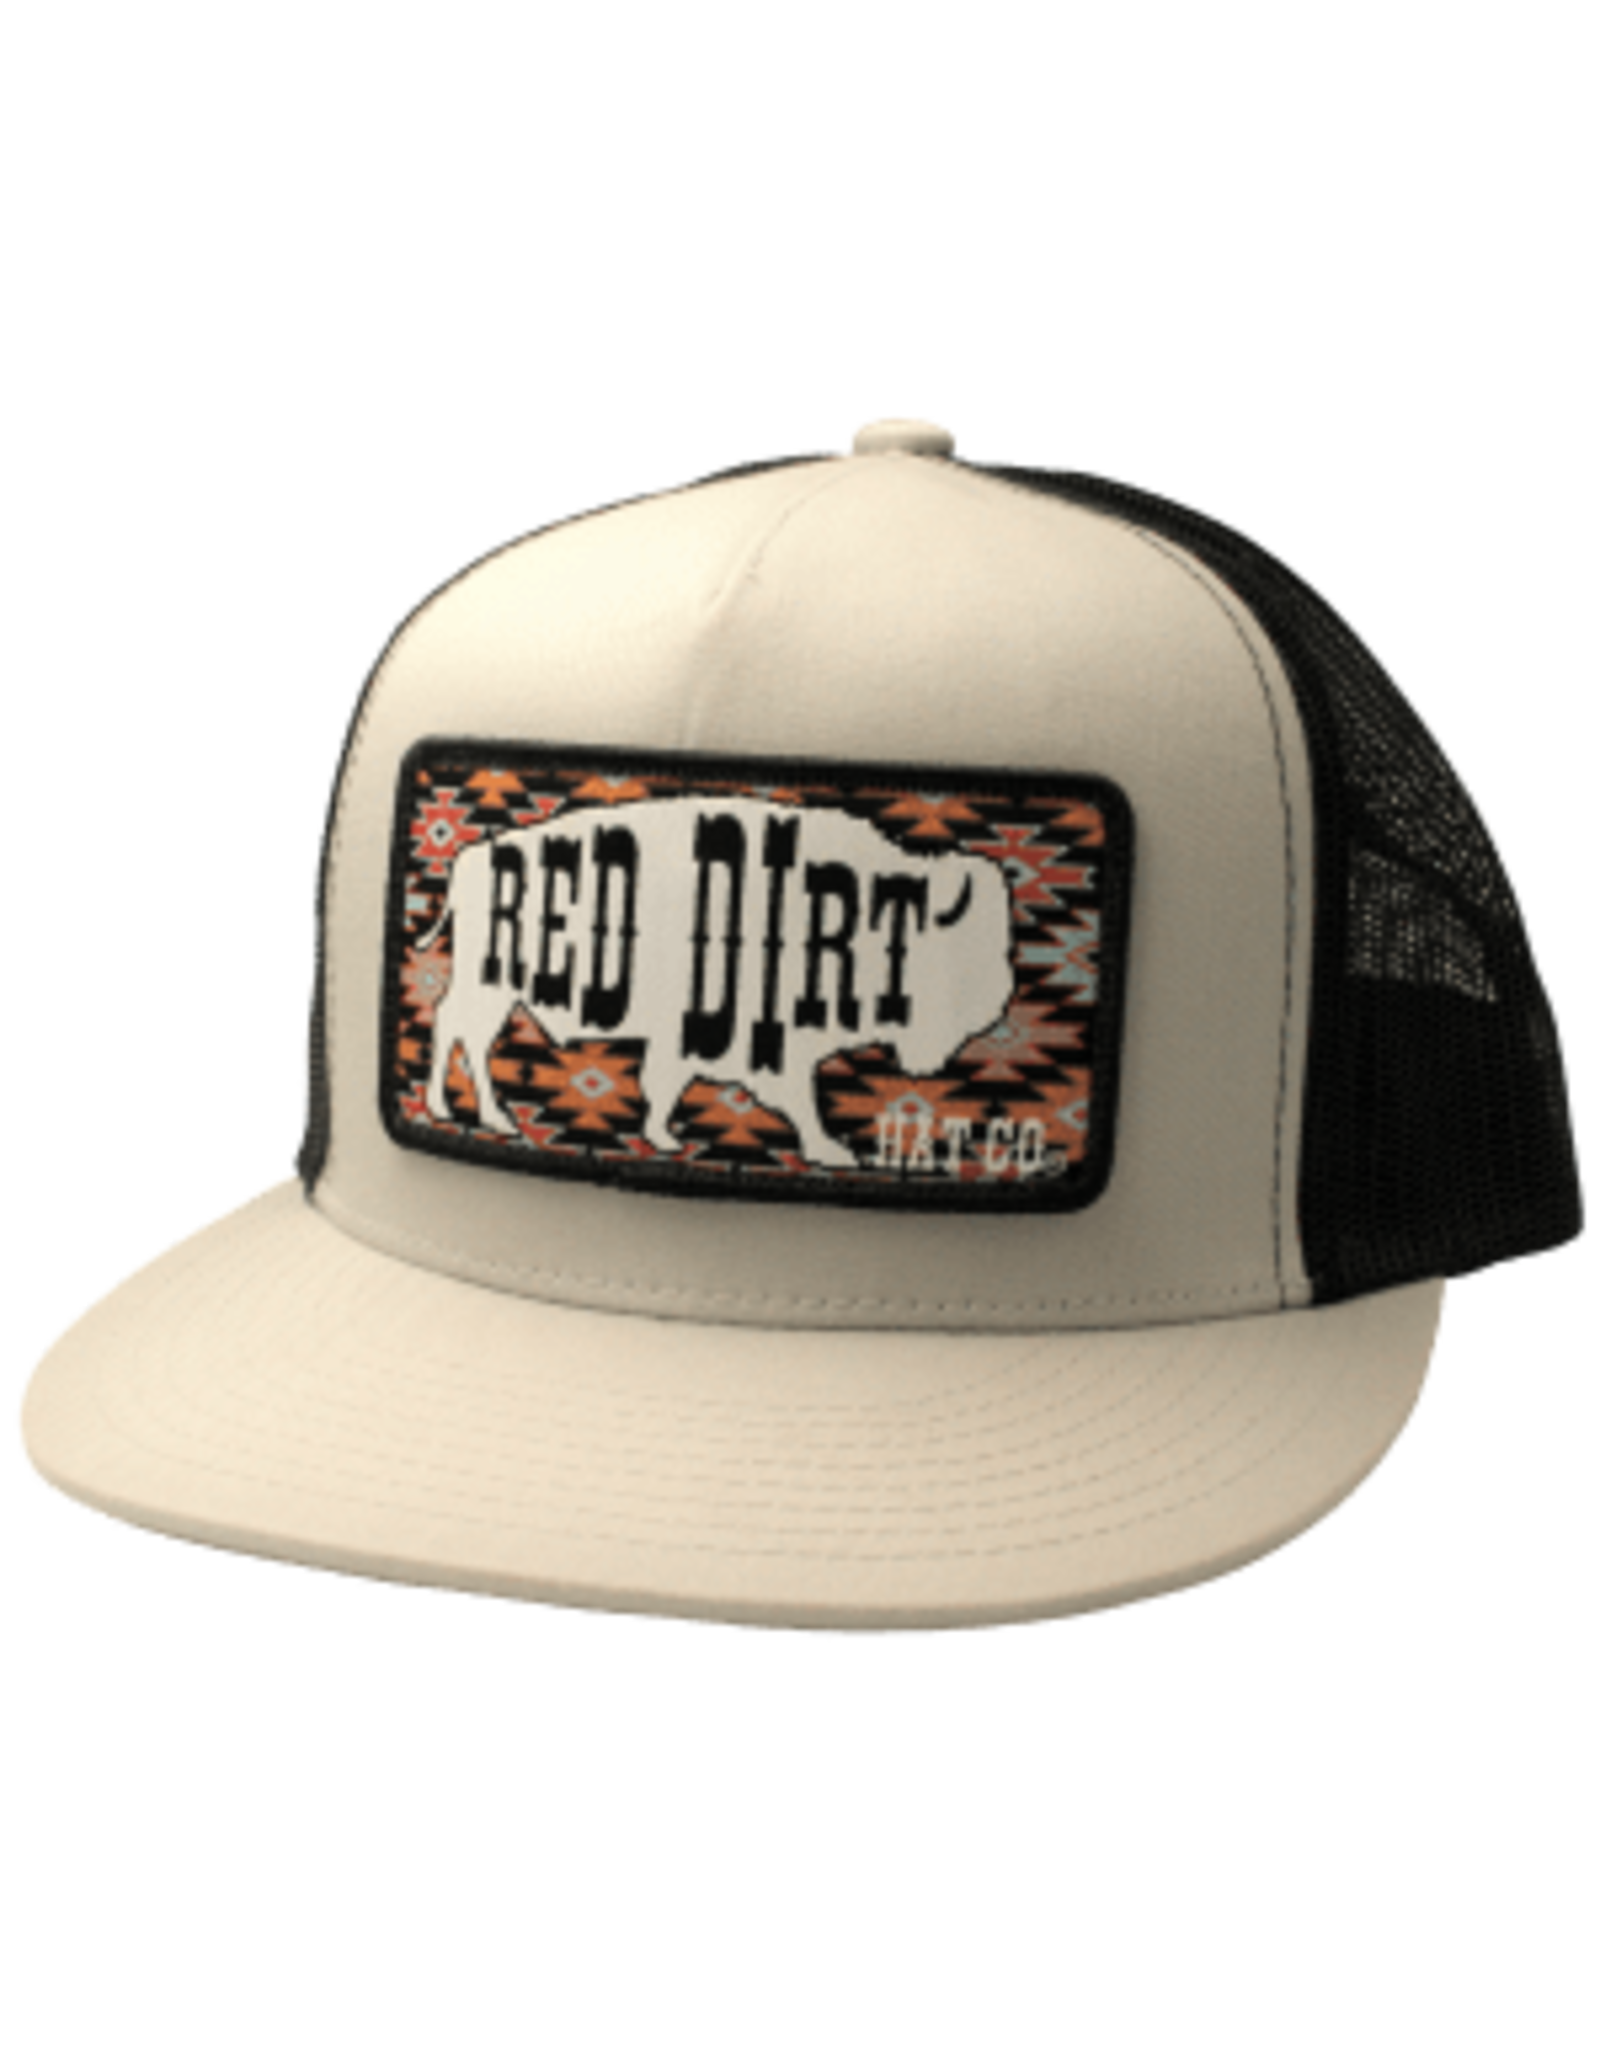 Red Dirt Hat Company Great White Buffalo Silver/ Black 5 Panel RDHC96 Snapback Cap